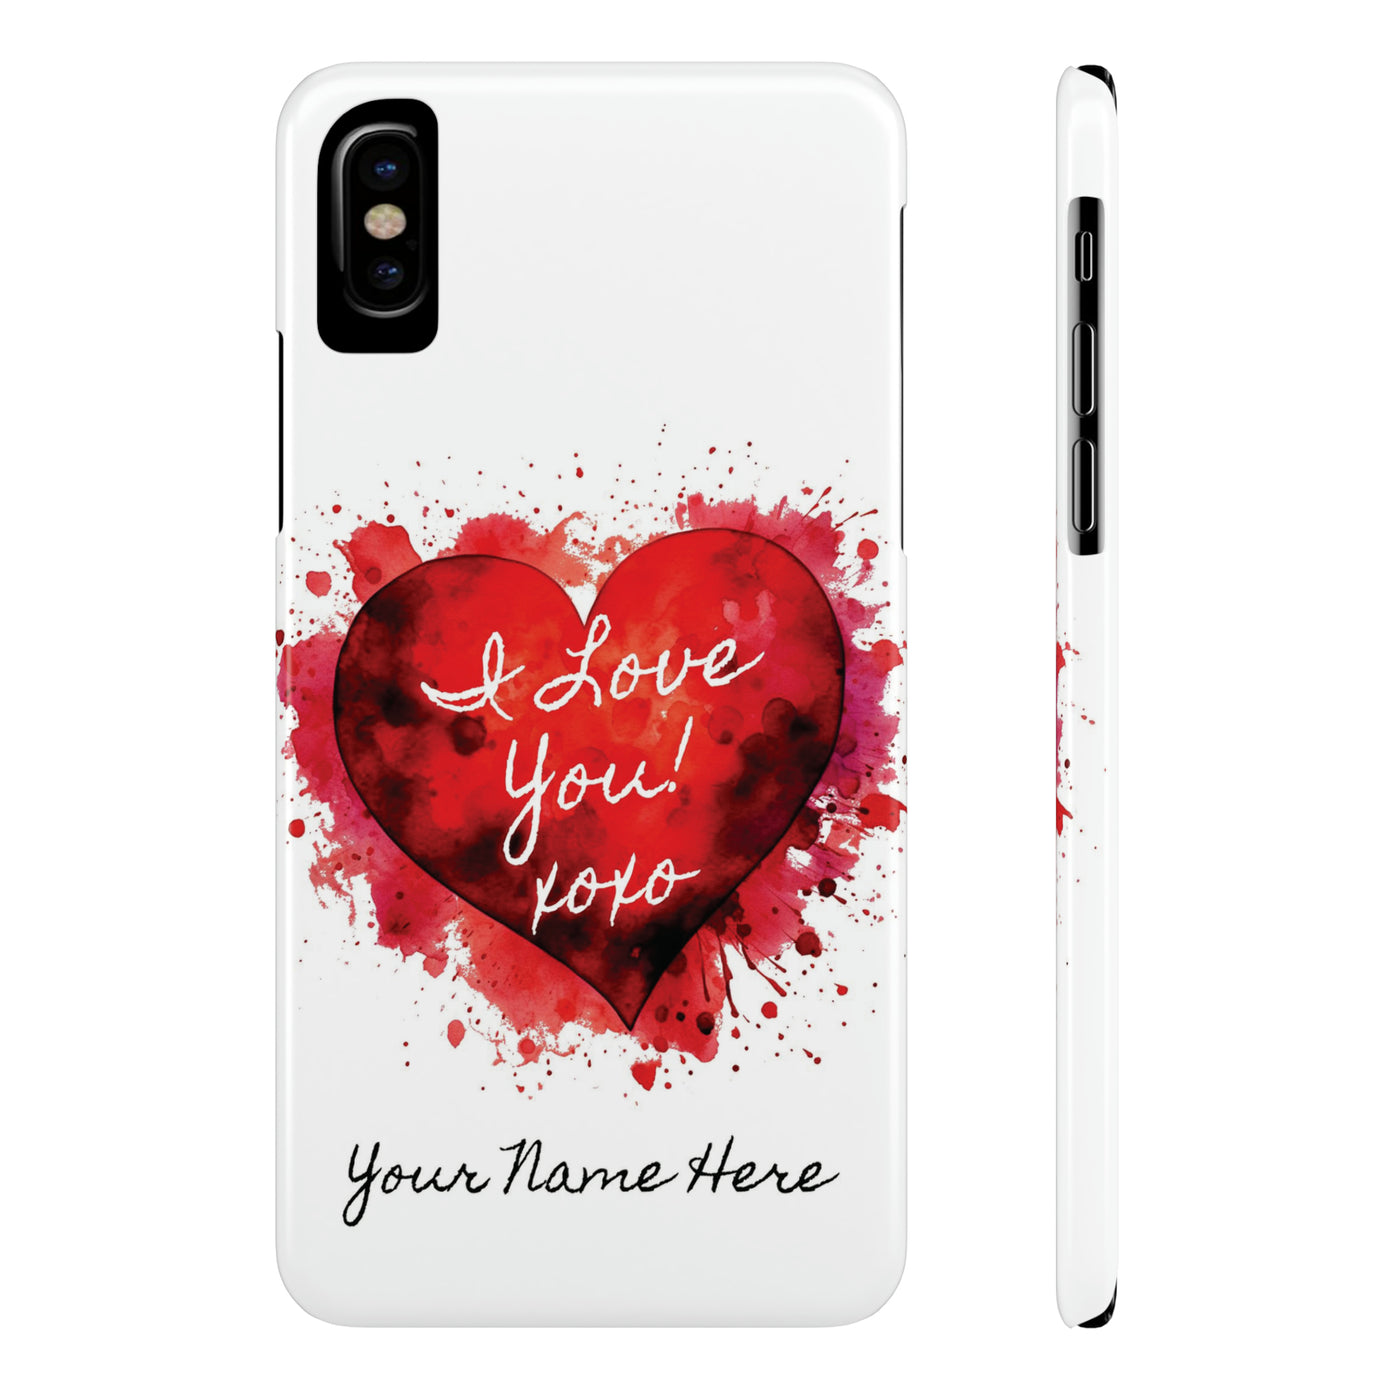 Personalized Slim Cute iPhone Cases - | iPhone 15 Case | iPhone 15 Pro Max Case, Iphone 14 Case, Iphone 14 Pro Max, Iphone 13, Valentine Heart Love